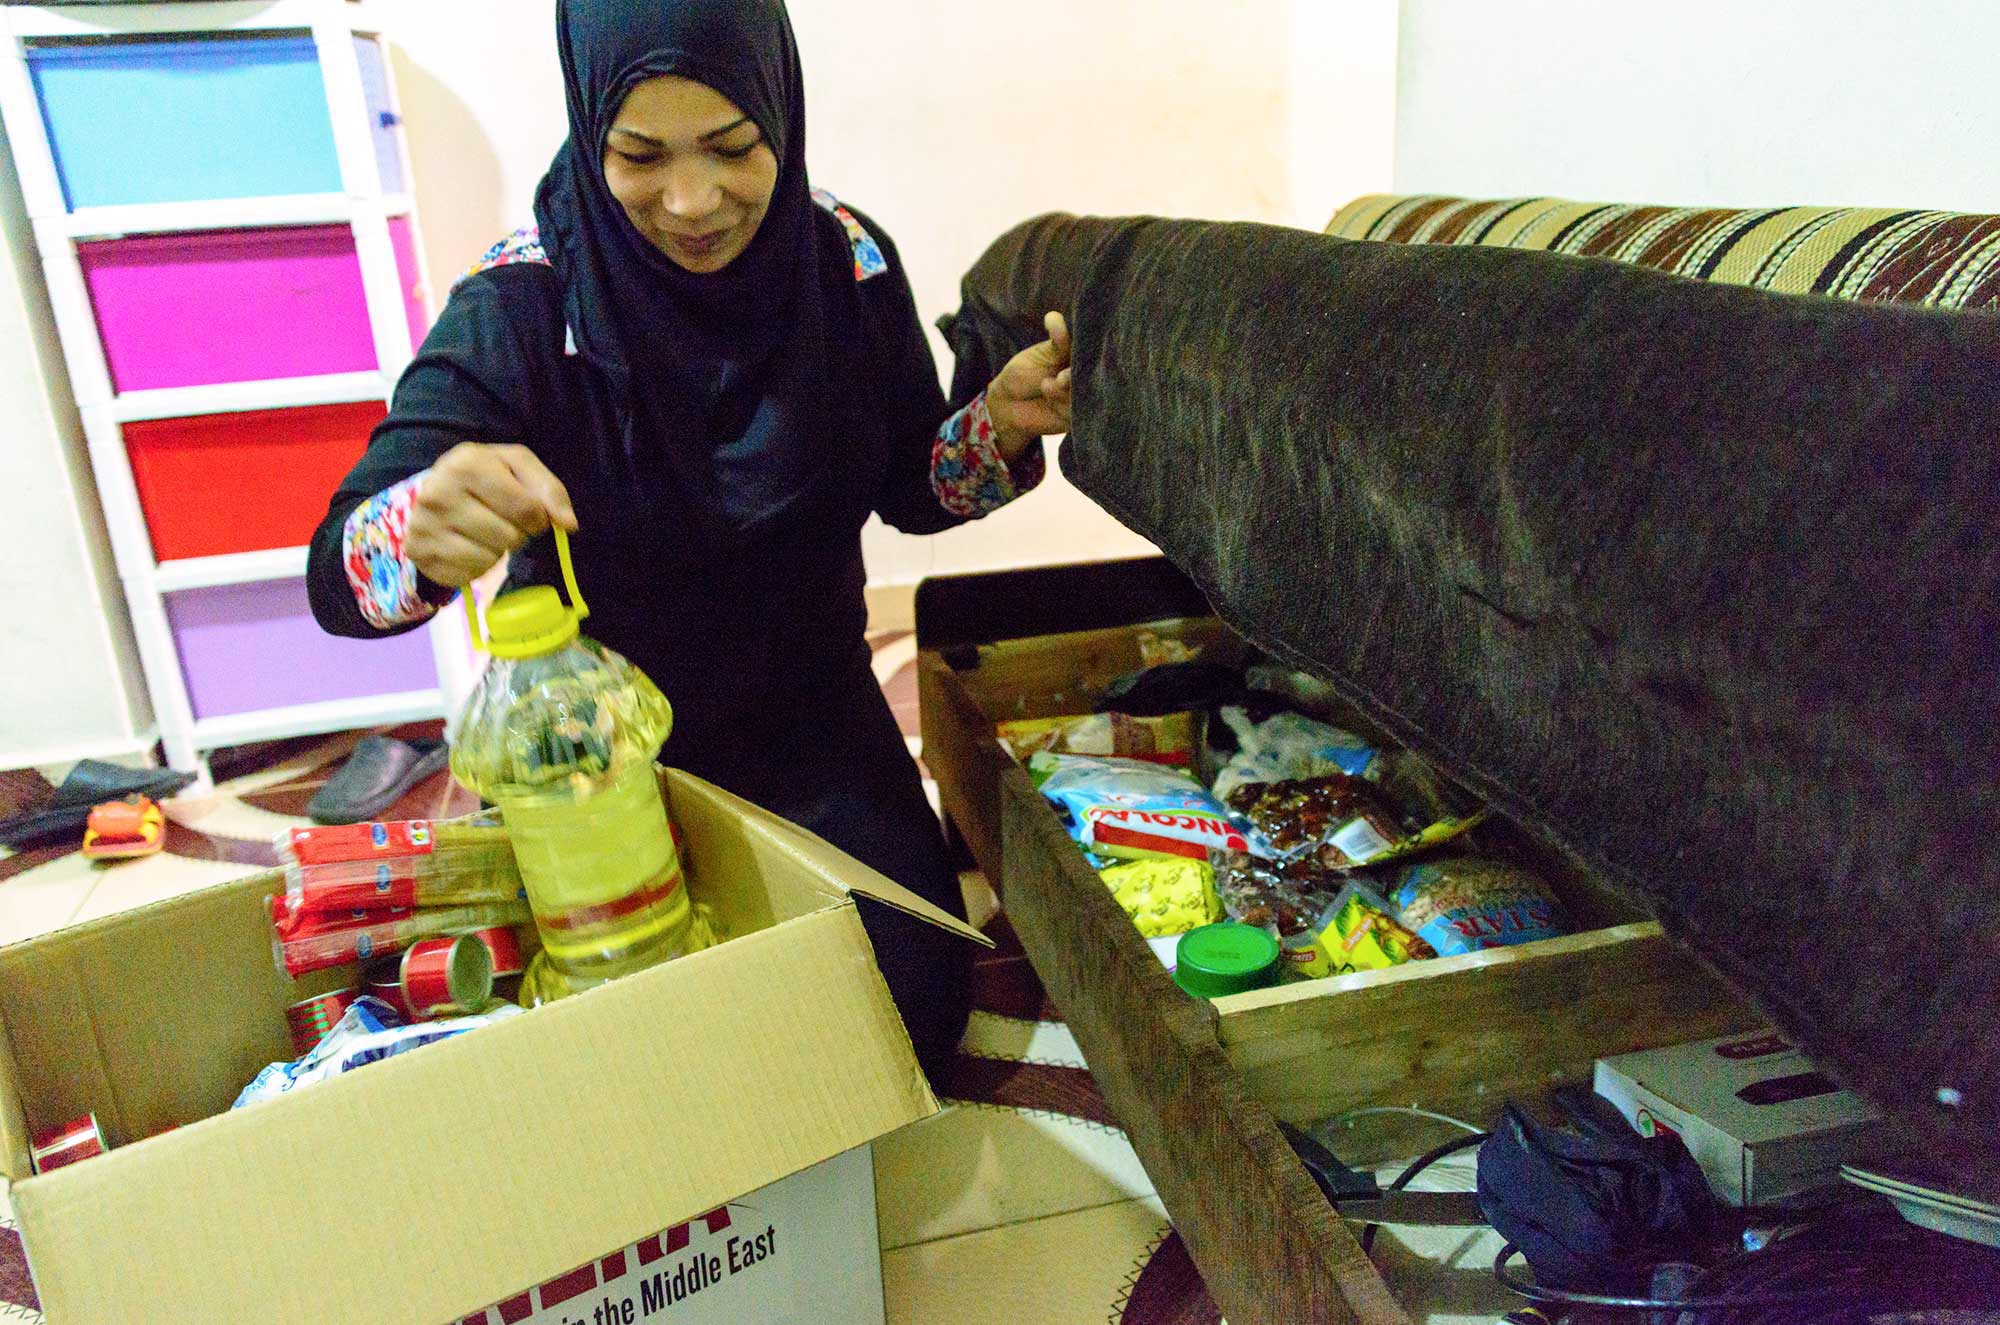 Samira stows away the items she received in her donated Ramadan food parcel.